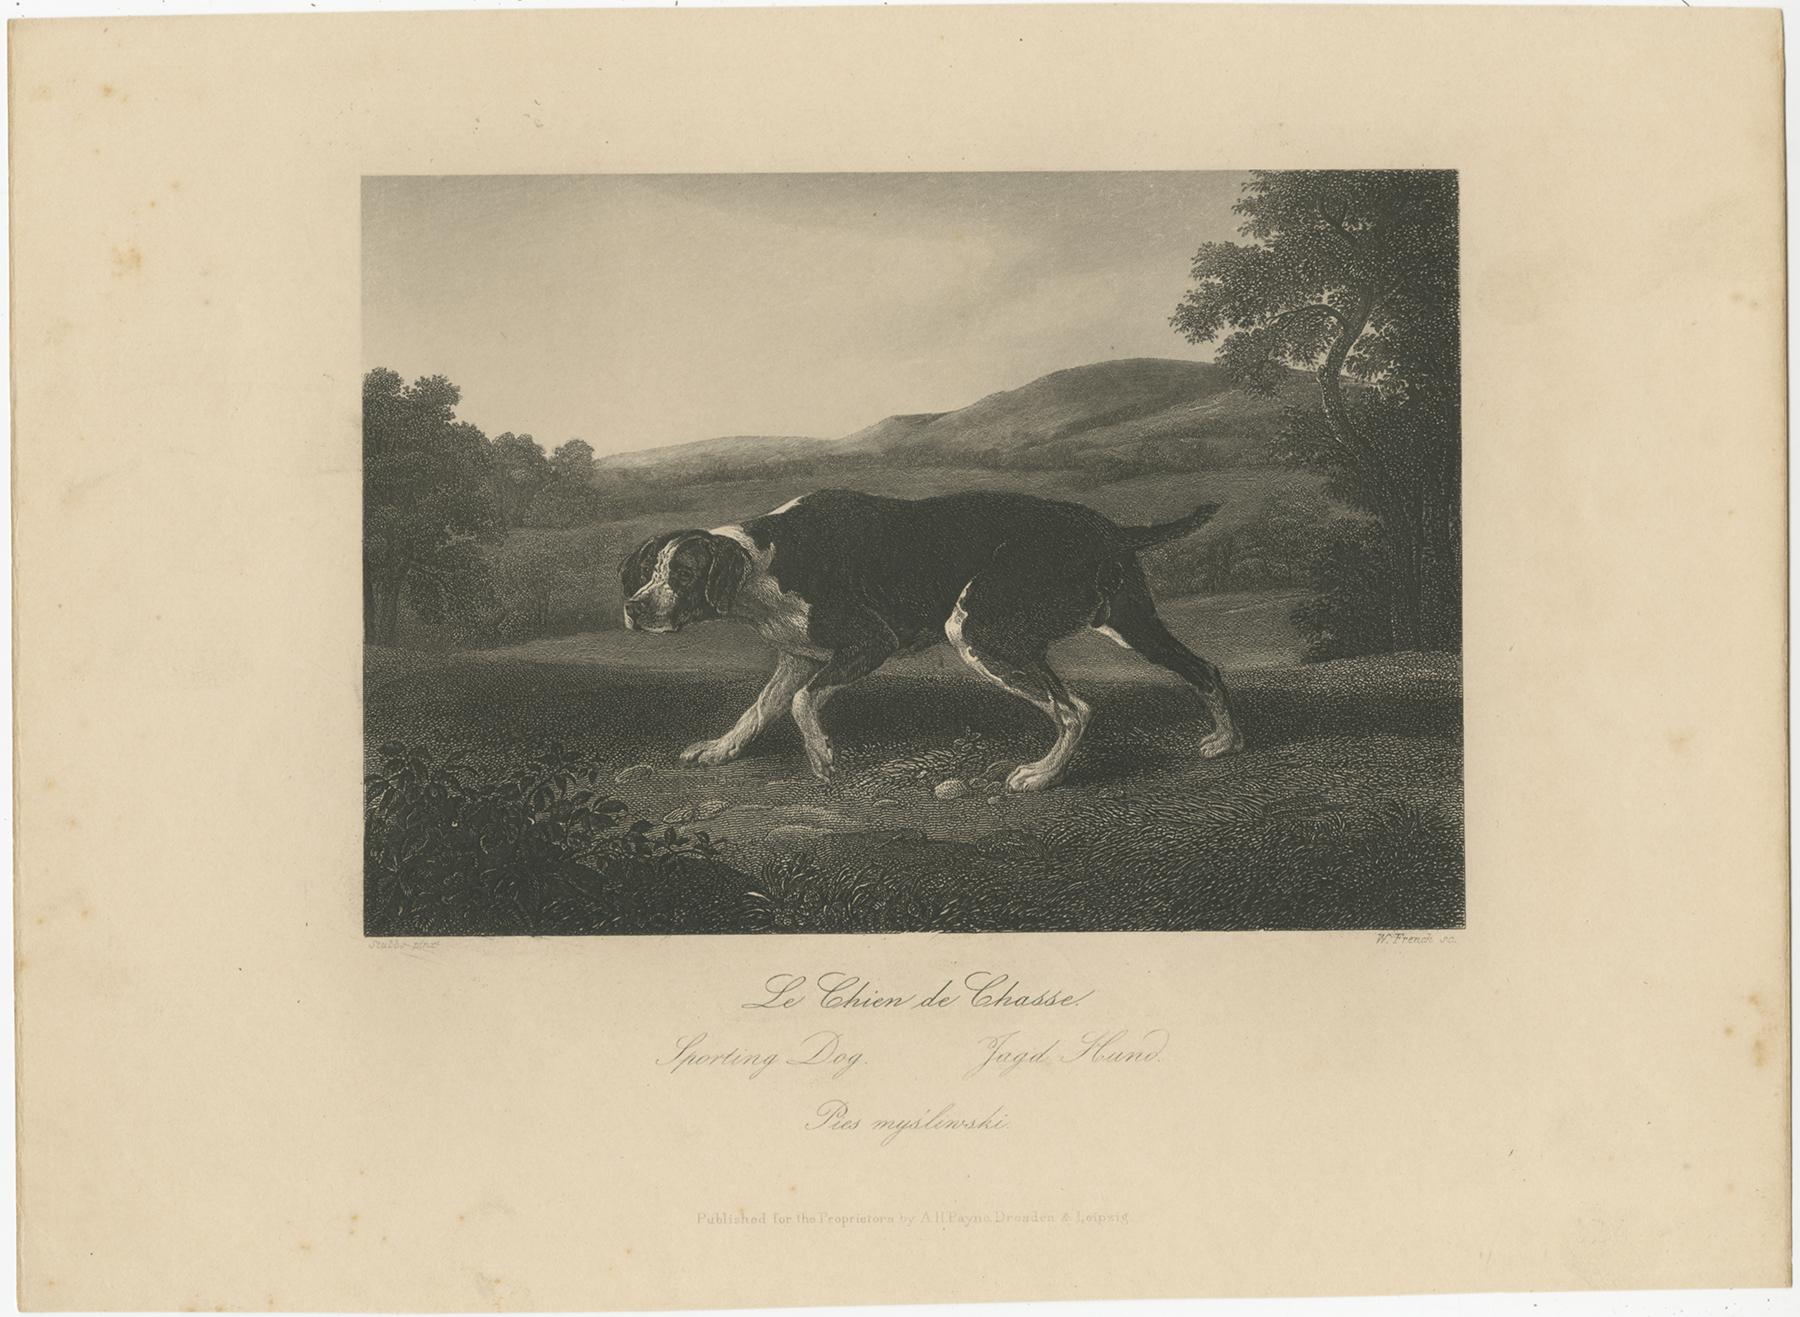 Antique print titled 'Le Chien de Chasse - Sporting Dog (..)'. Original engraving of a hunting dog. Lithographed by W. French after Stubbs. Published by A.H. Payne, circa 1850.